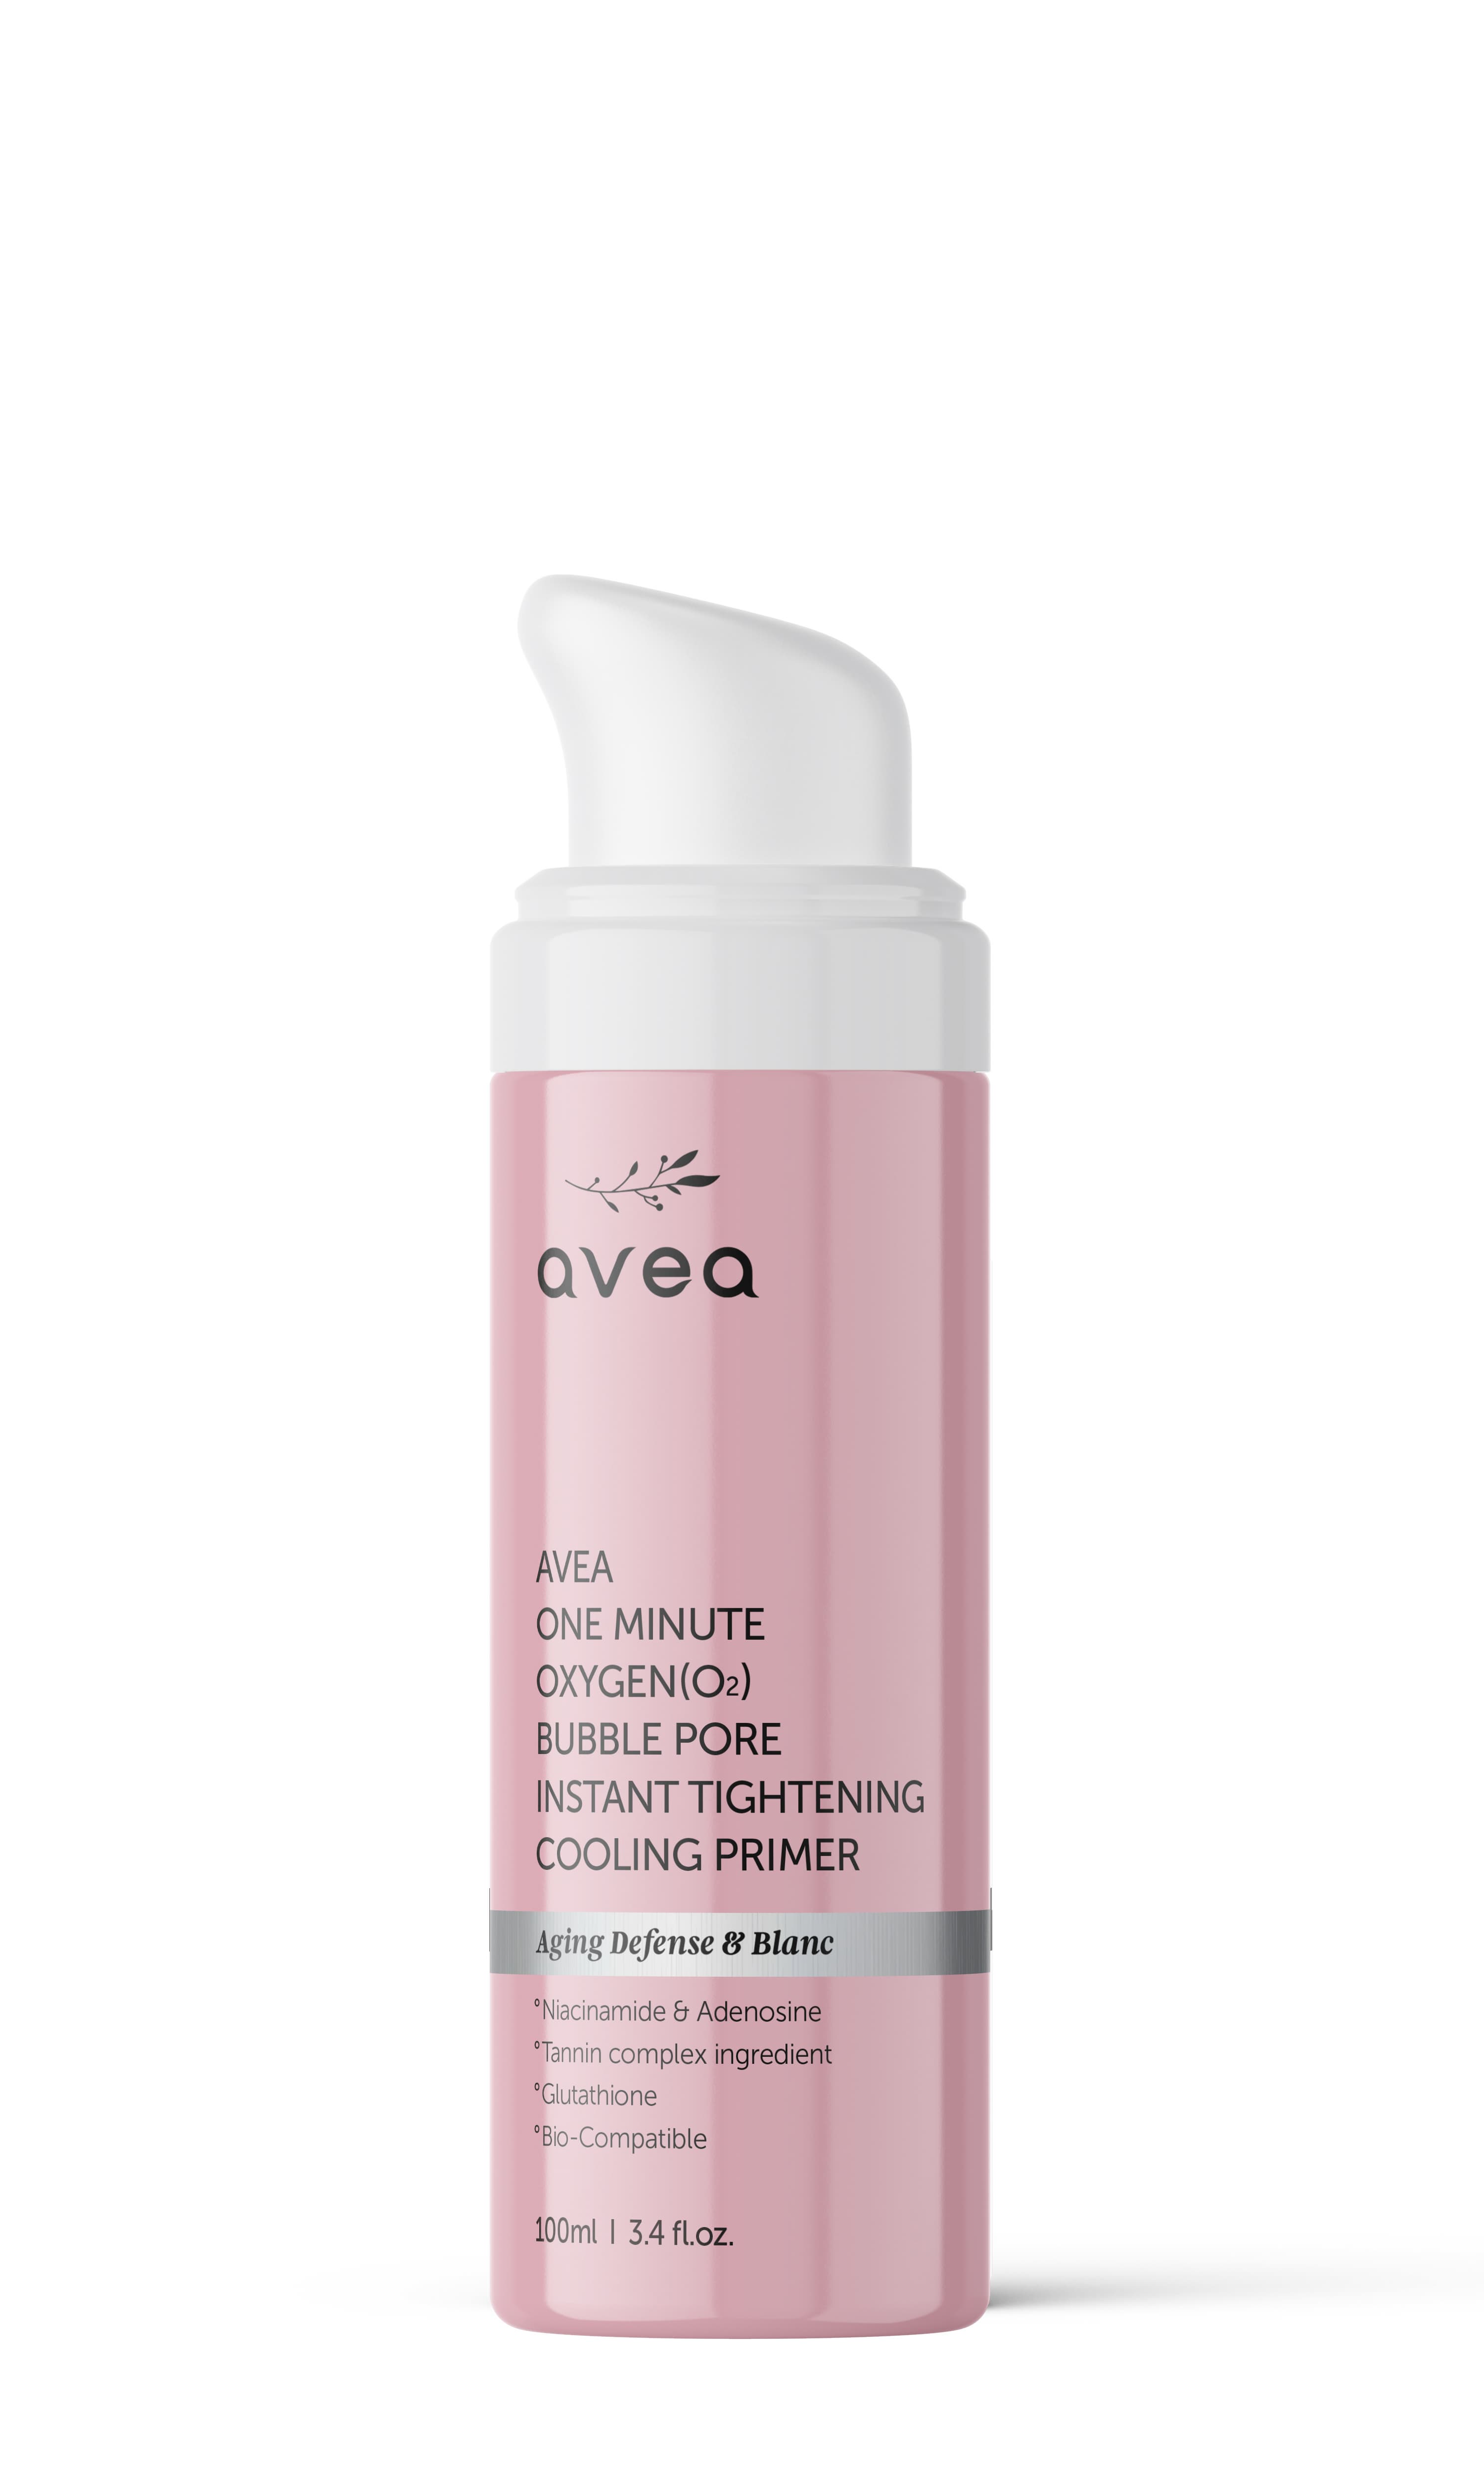 AVEA One Minute O2 Bubble Pore Instant Tightening Cooling Primer